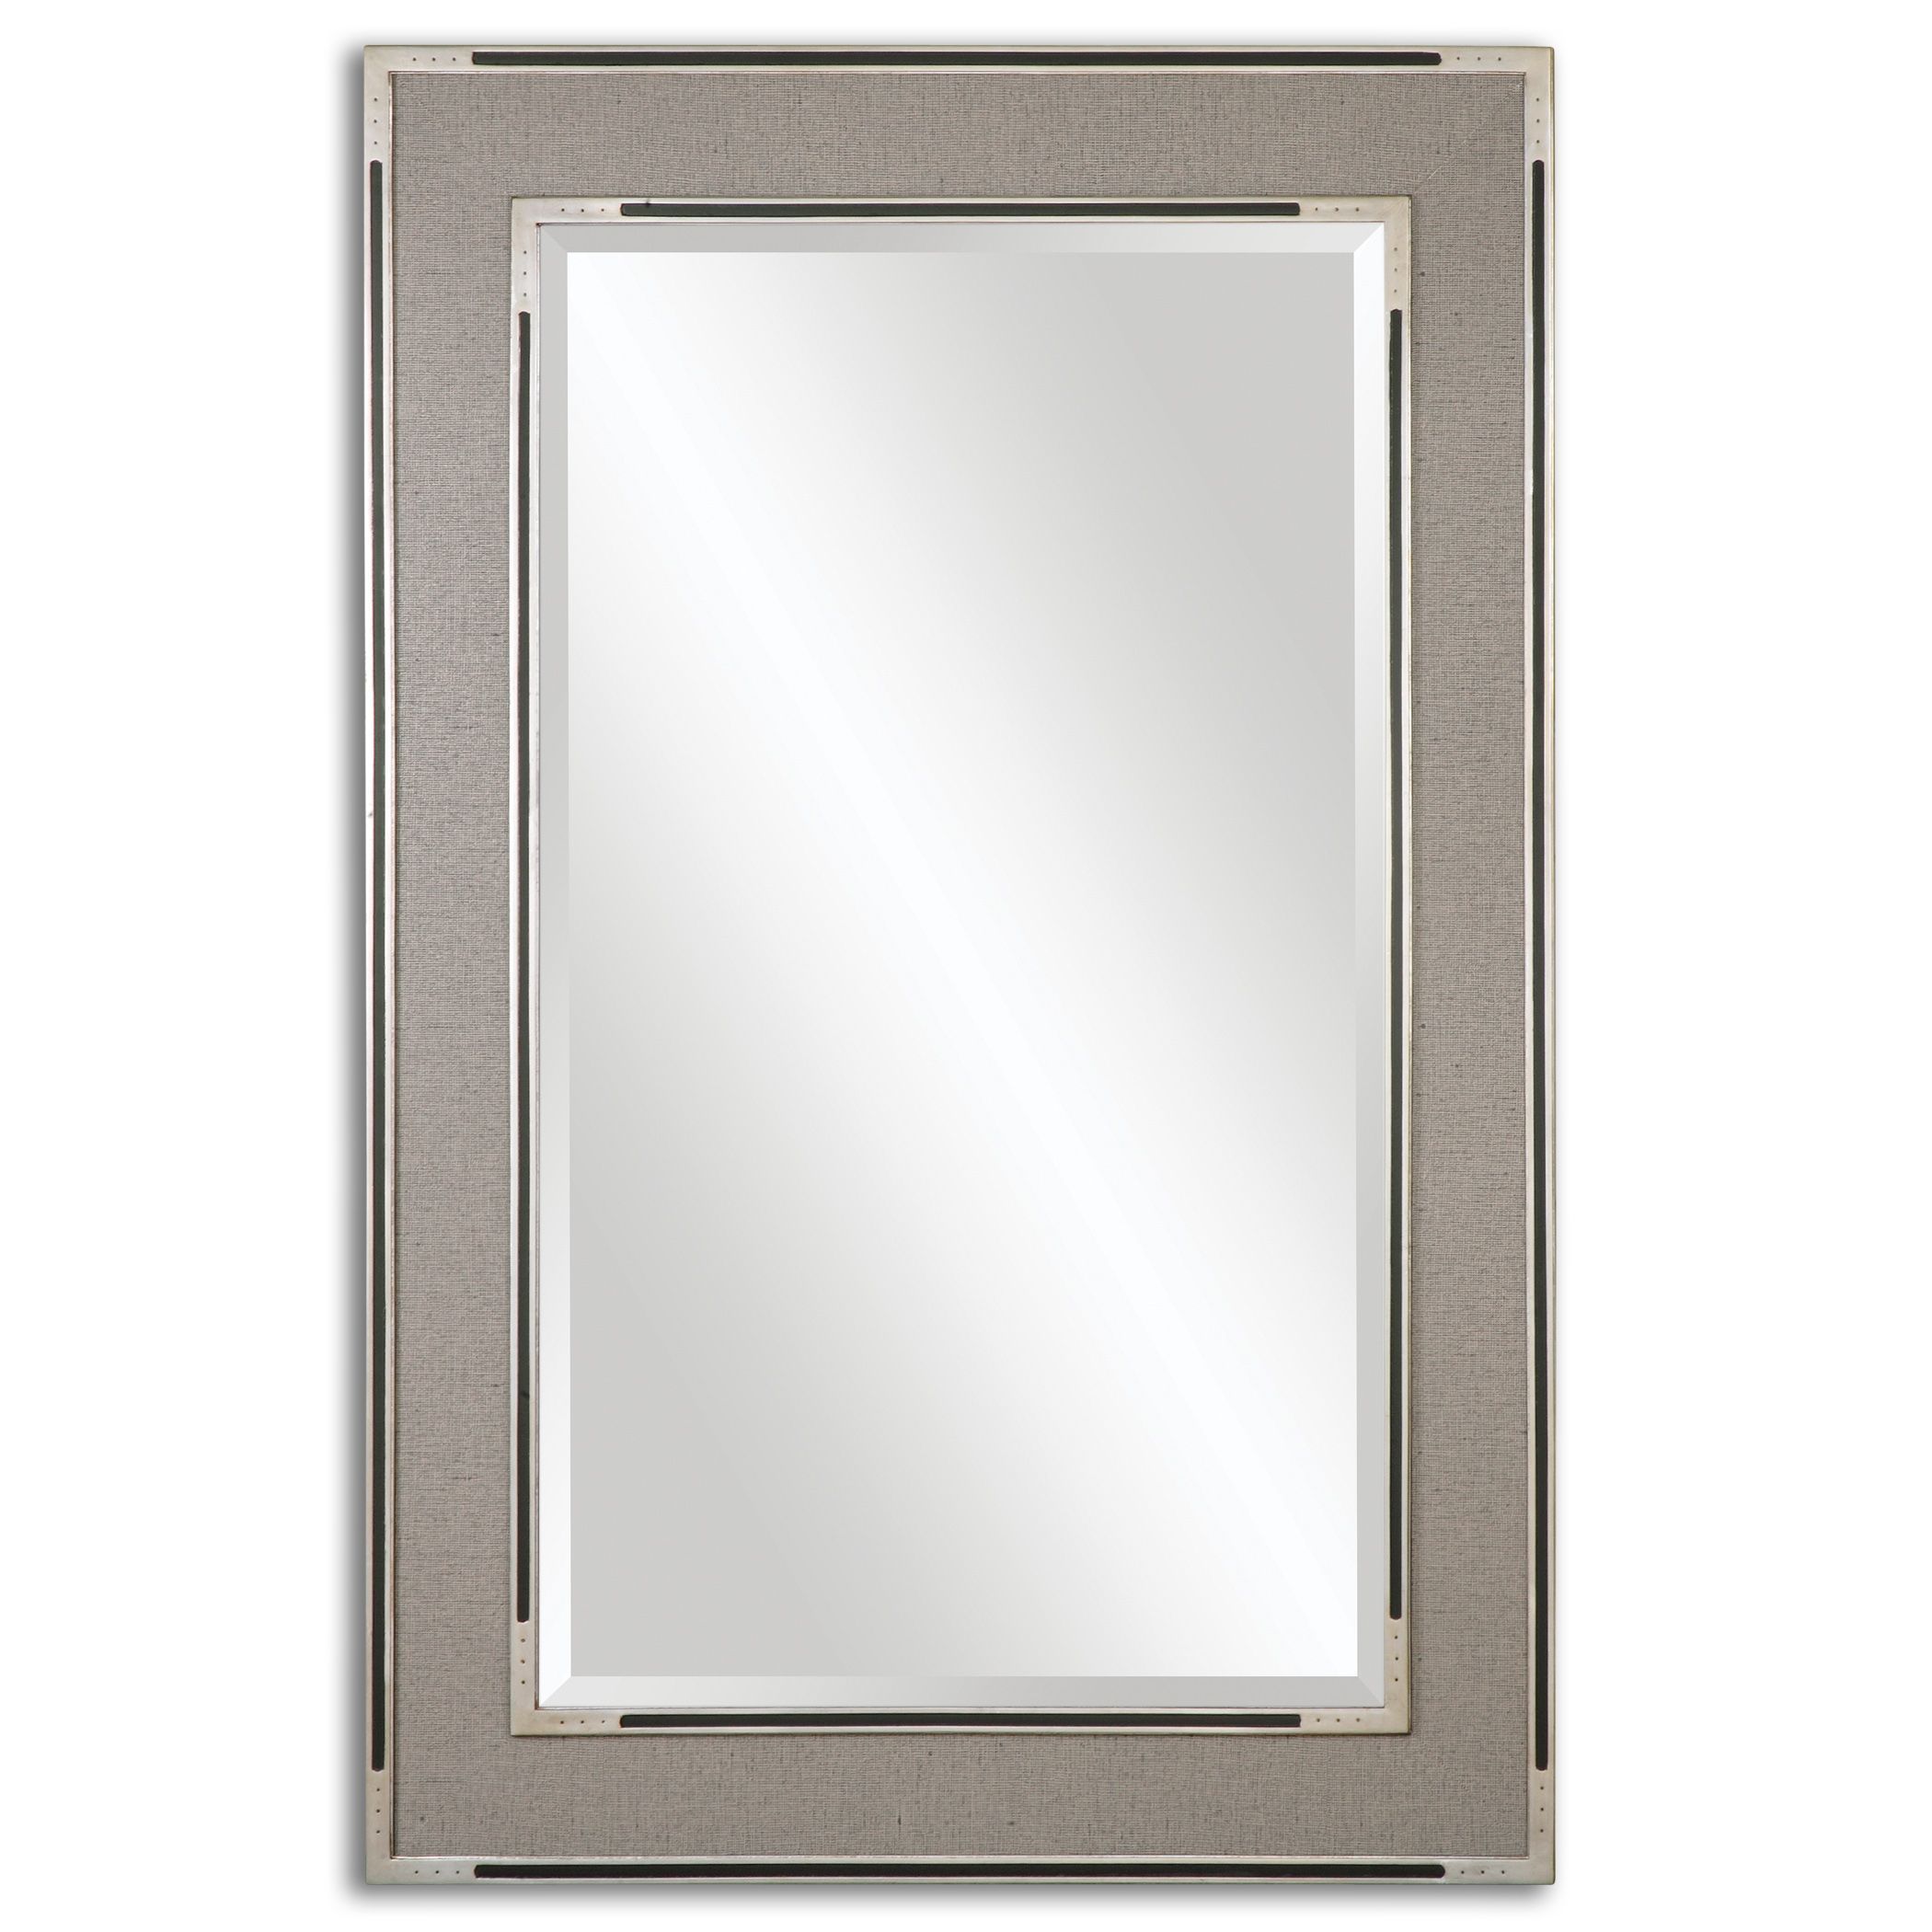 Alfred Oversized Gray Tan Mirror In 2019 | Products Throughout Eriq Framed Wall Mirrors (View 6 of 20)